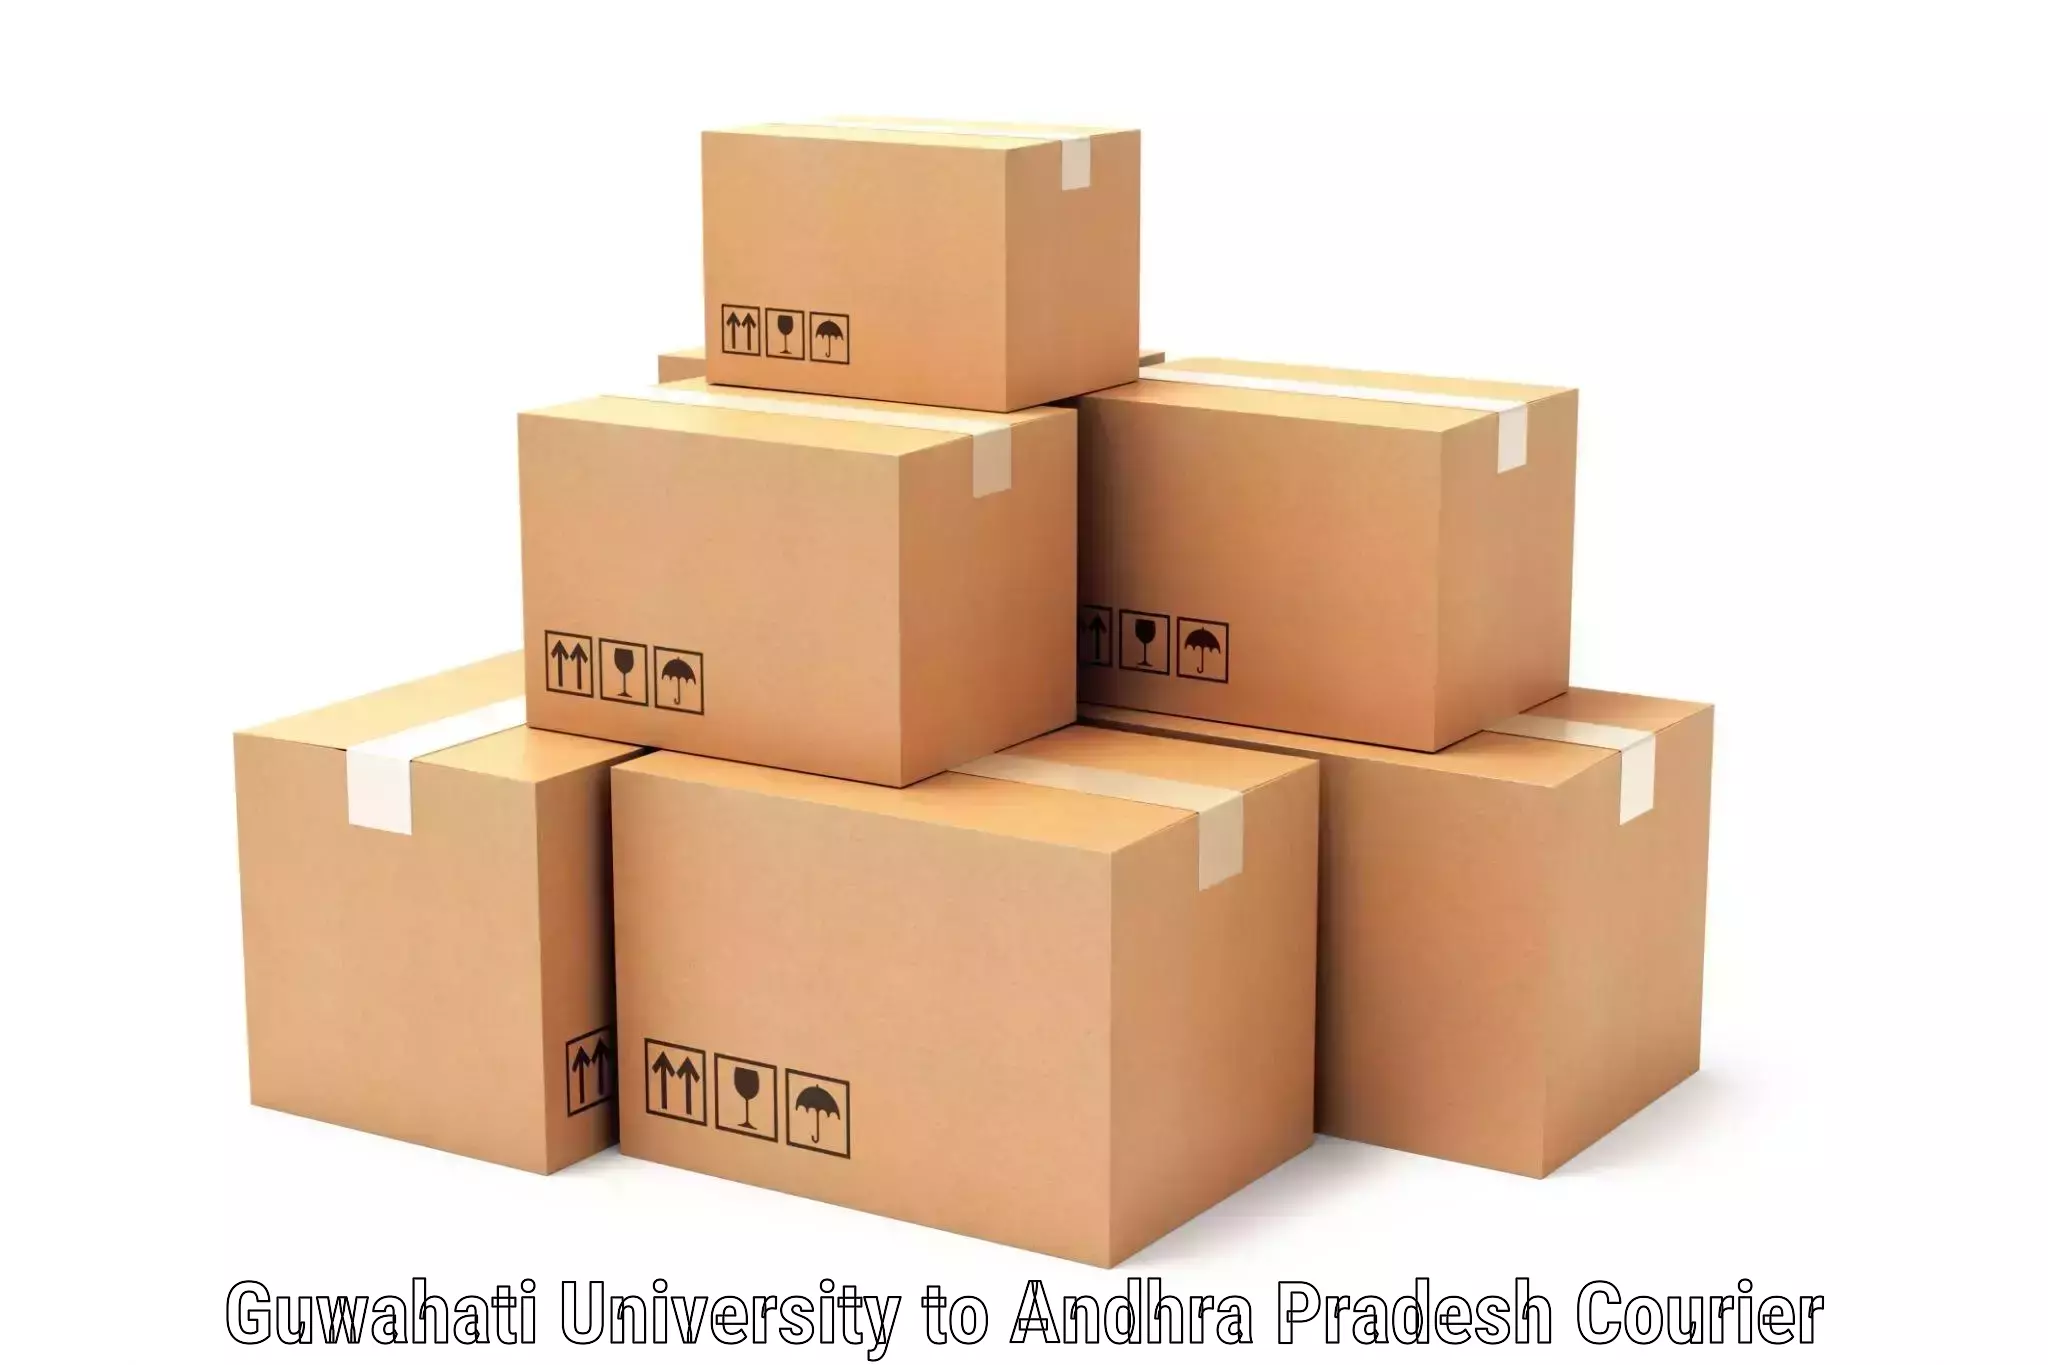 Reliable courier service in Guwahati University to Andhra Pradesh